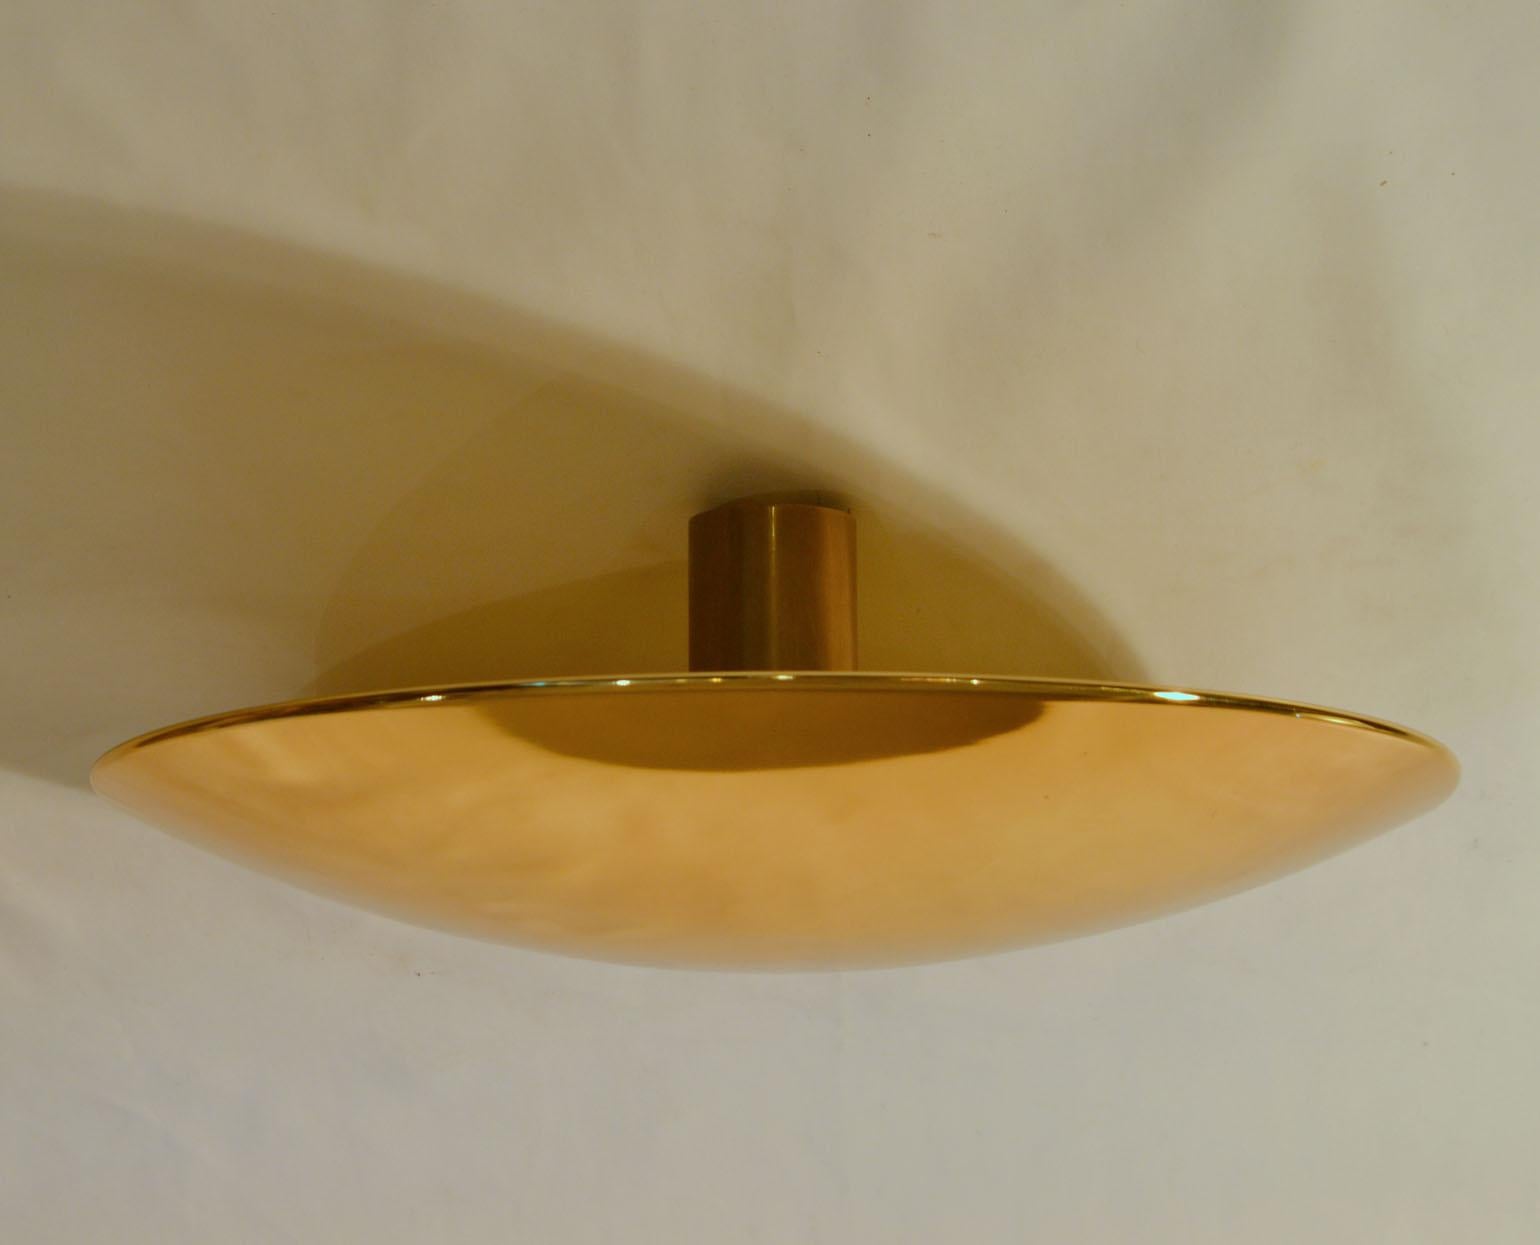 Spun Pair of Large Brass Flush Mount Ceiling or Wall Lights by Florian Schulz